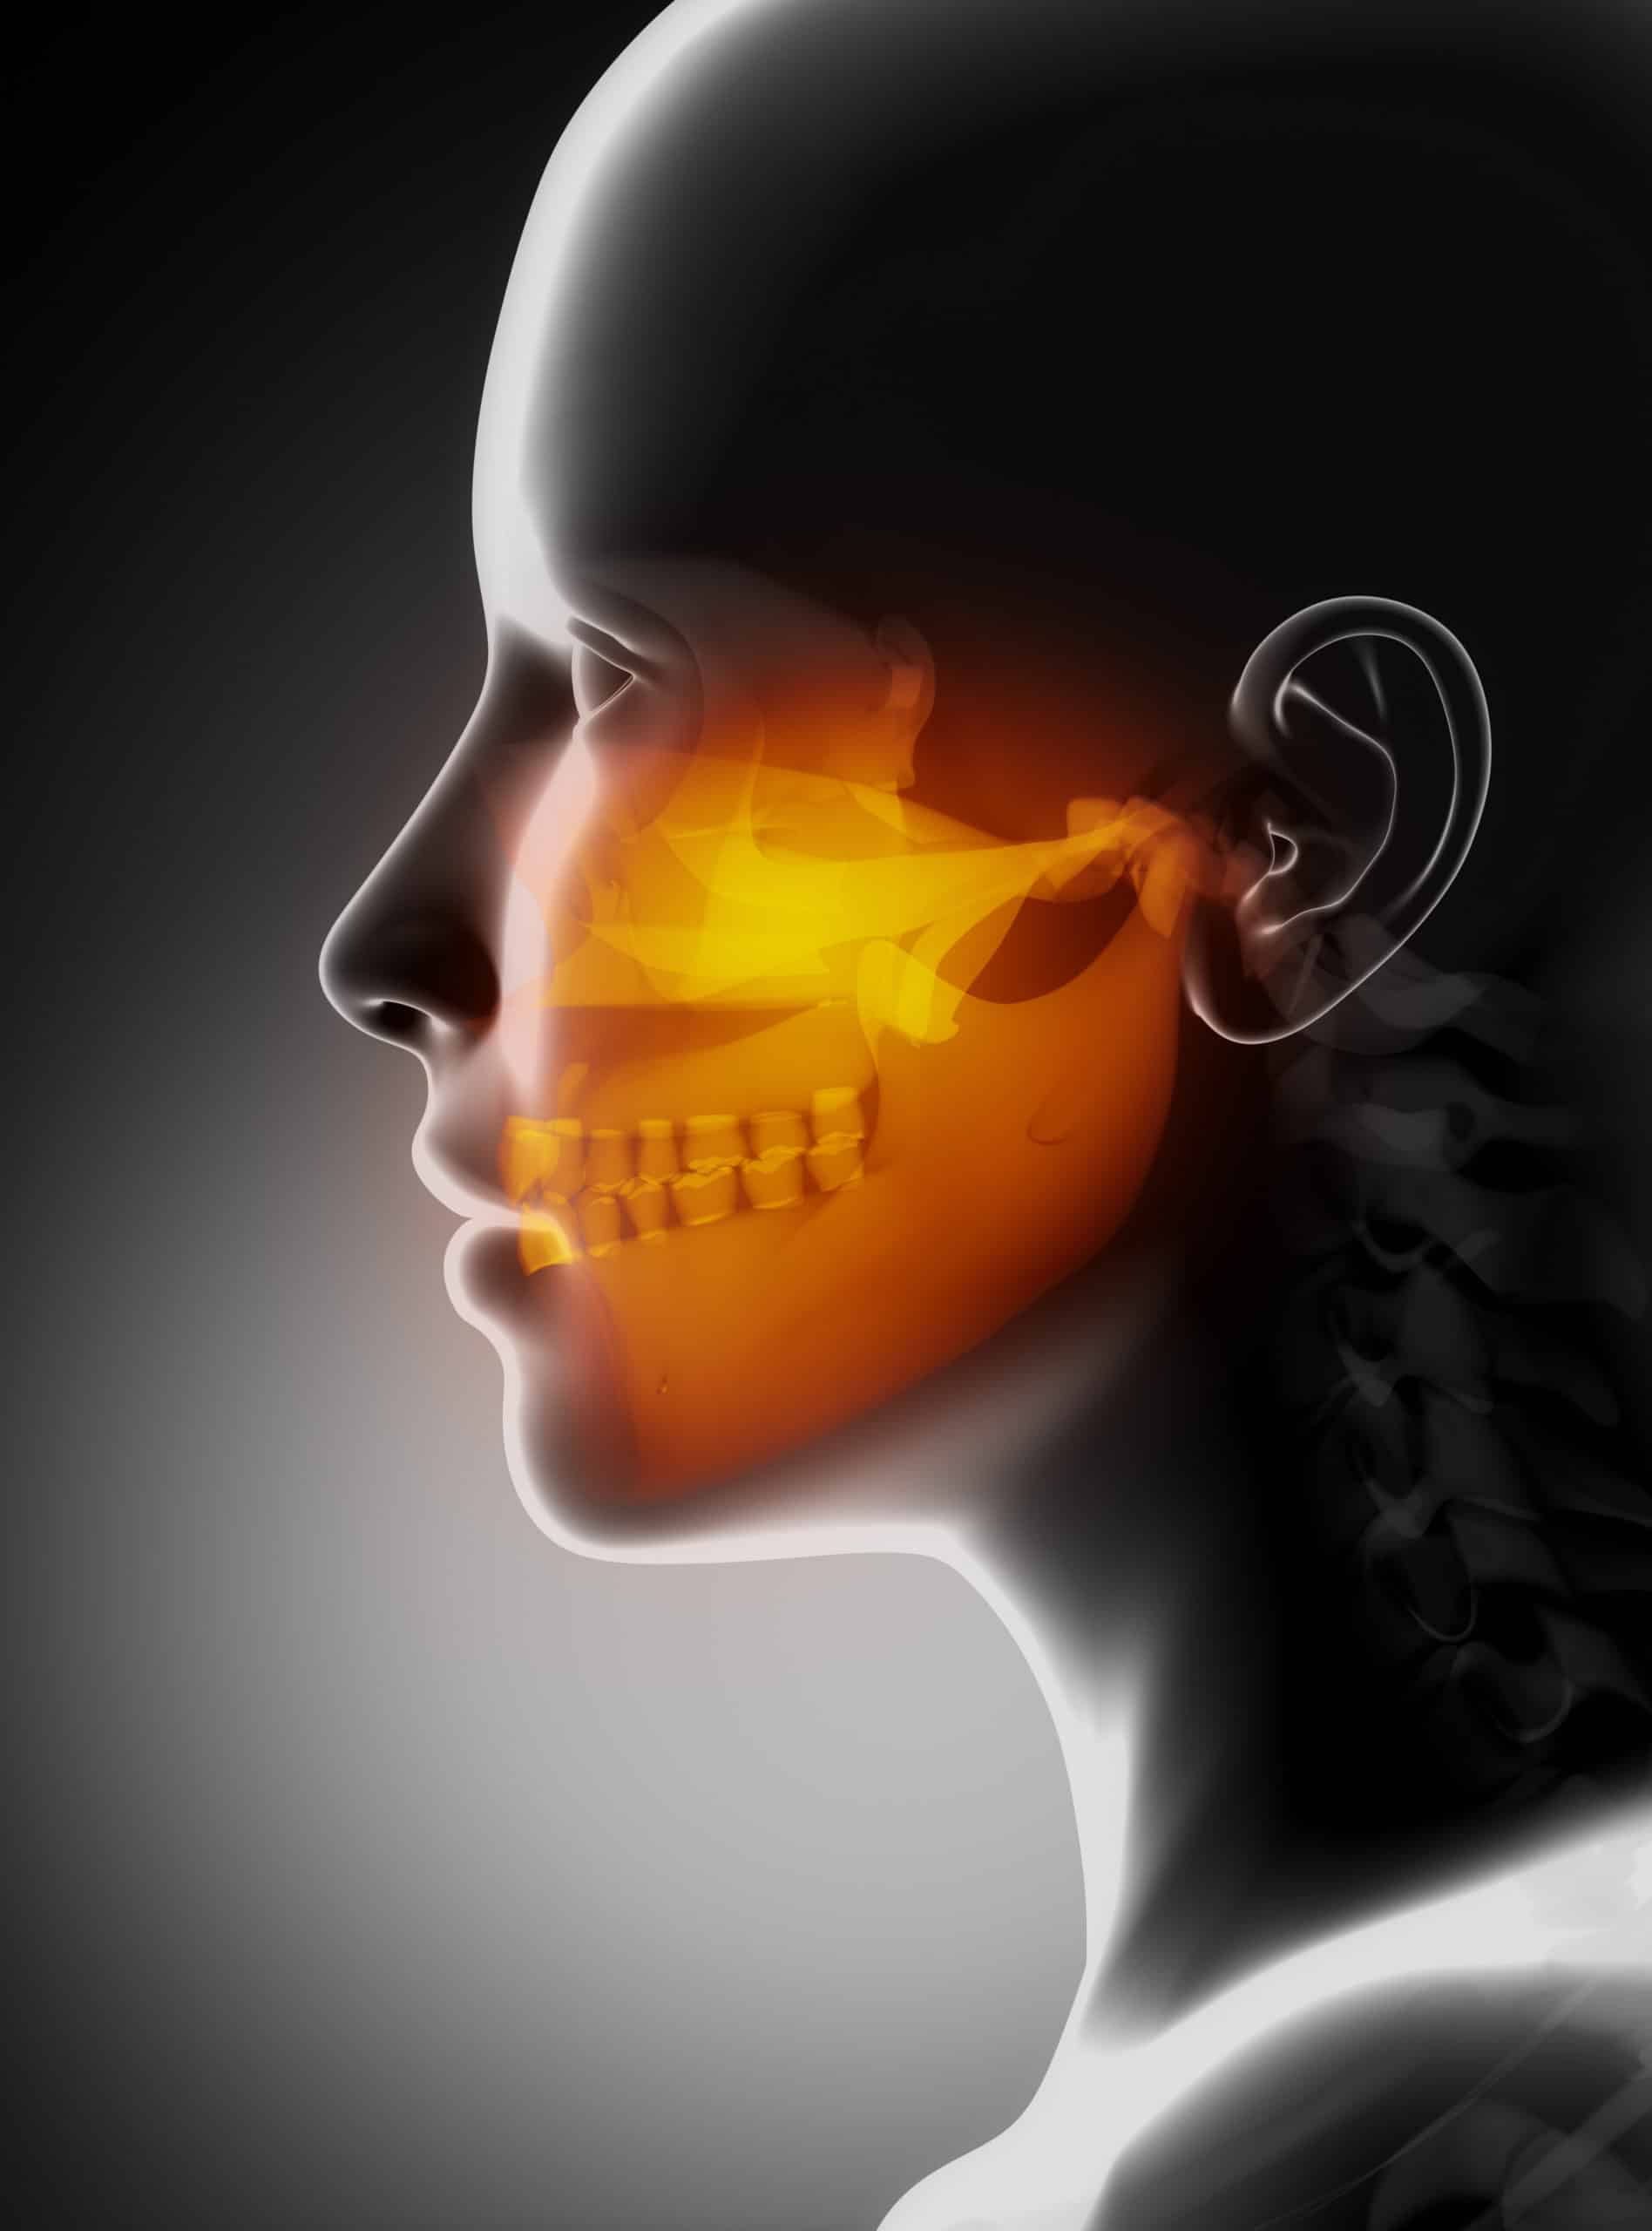 TMJ Disorders: 3 Important Things To Know